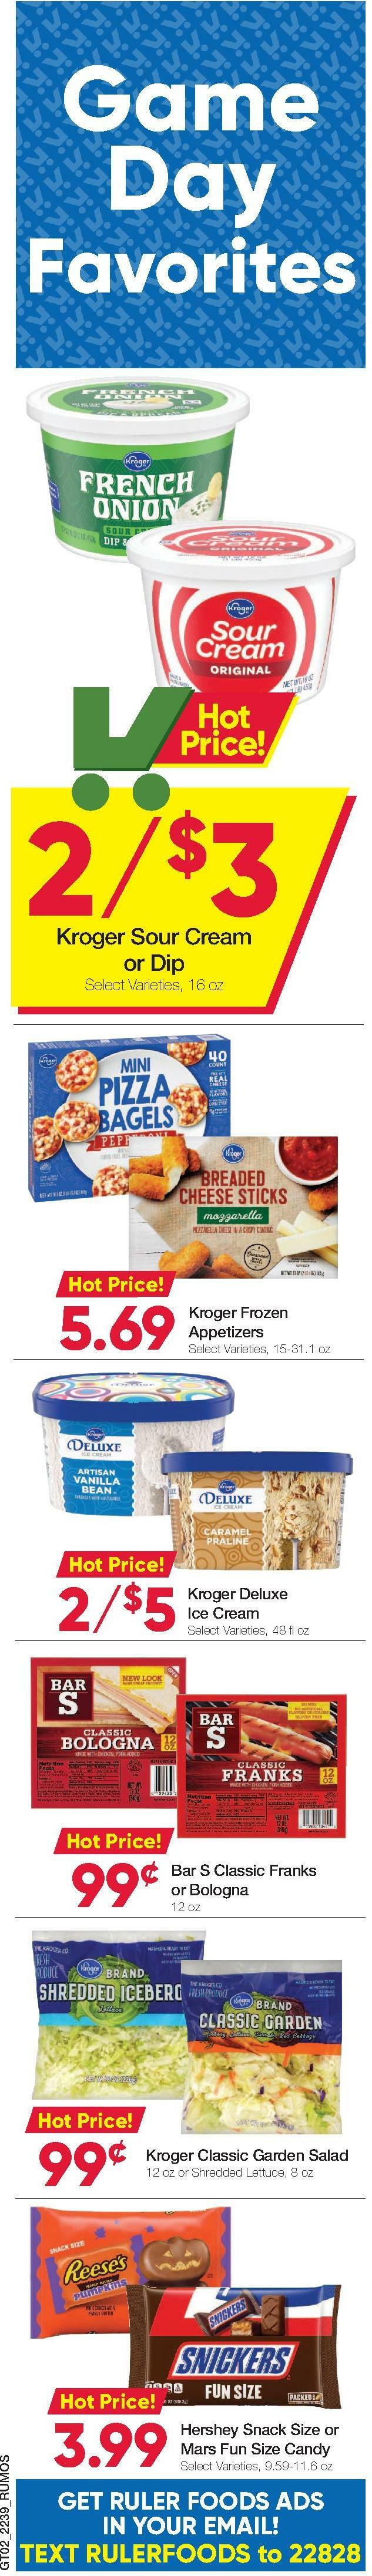 Ruler Foods Weekly Ad from October 26